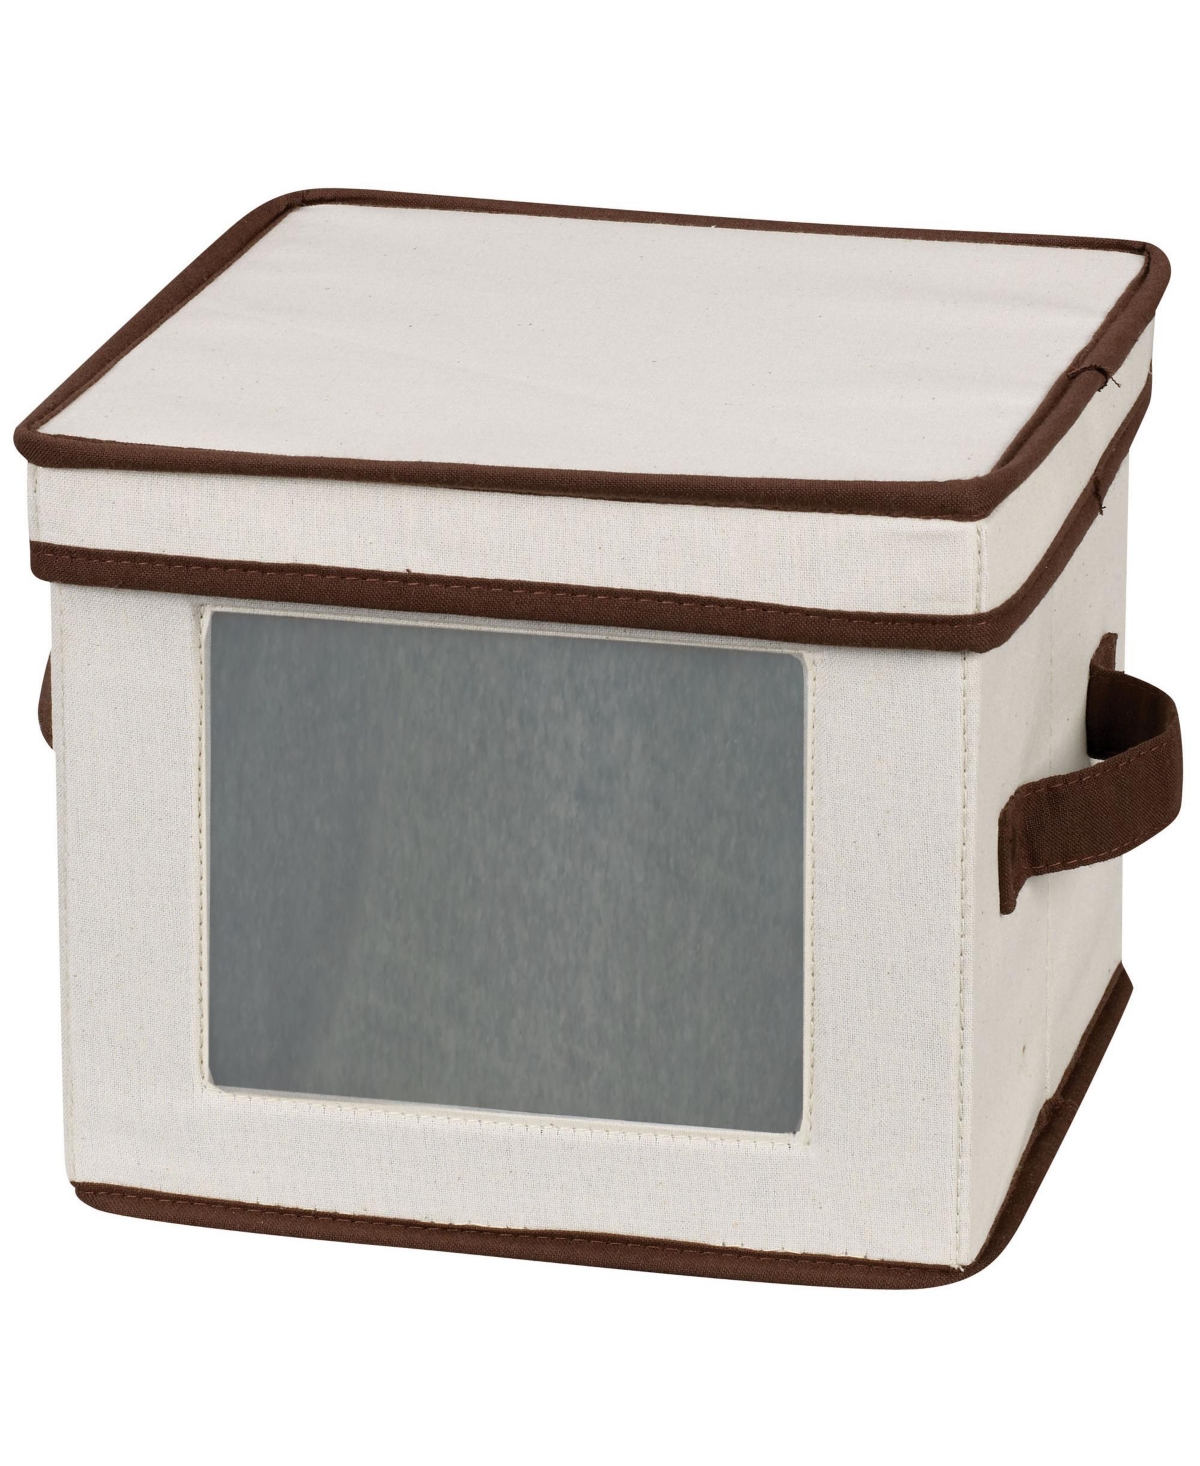 Household Essentials China Plate Storage Box In Cream,natural